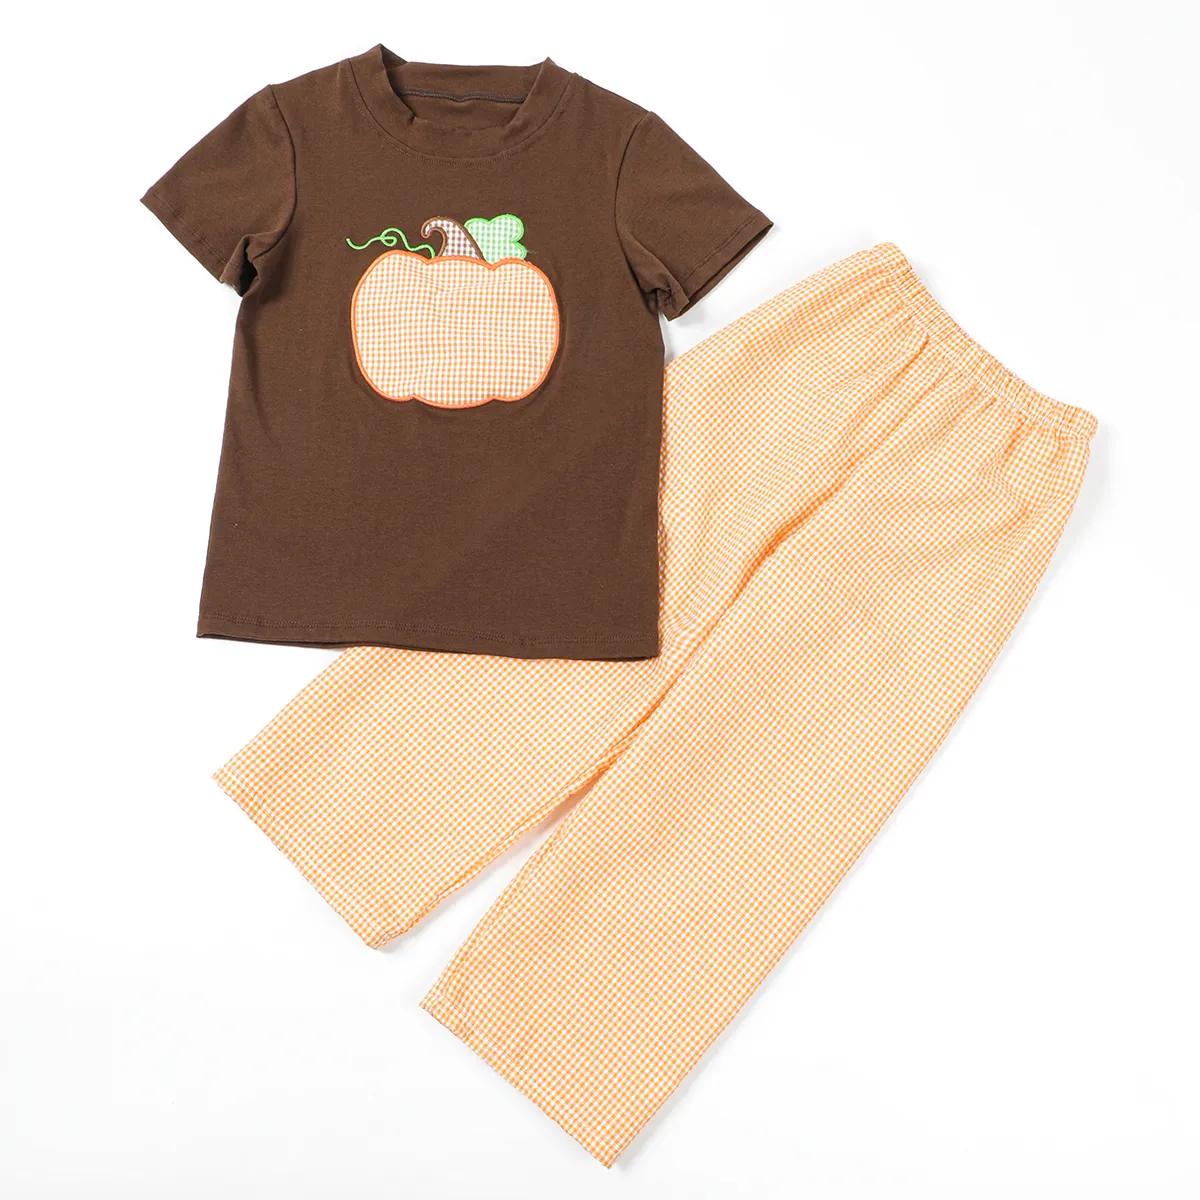 New arrival pumpkin applique embroidery customized shirt and pants boys outfits summer clothing sets